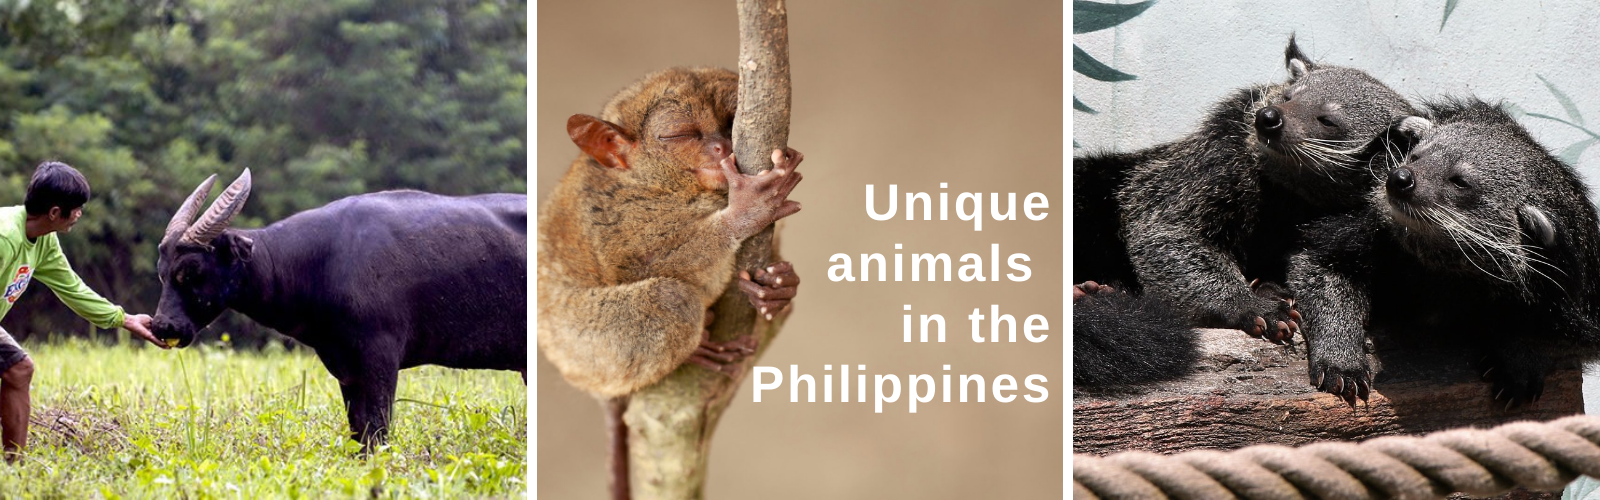 Three unique animals to see on your visit to Philippines